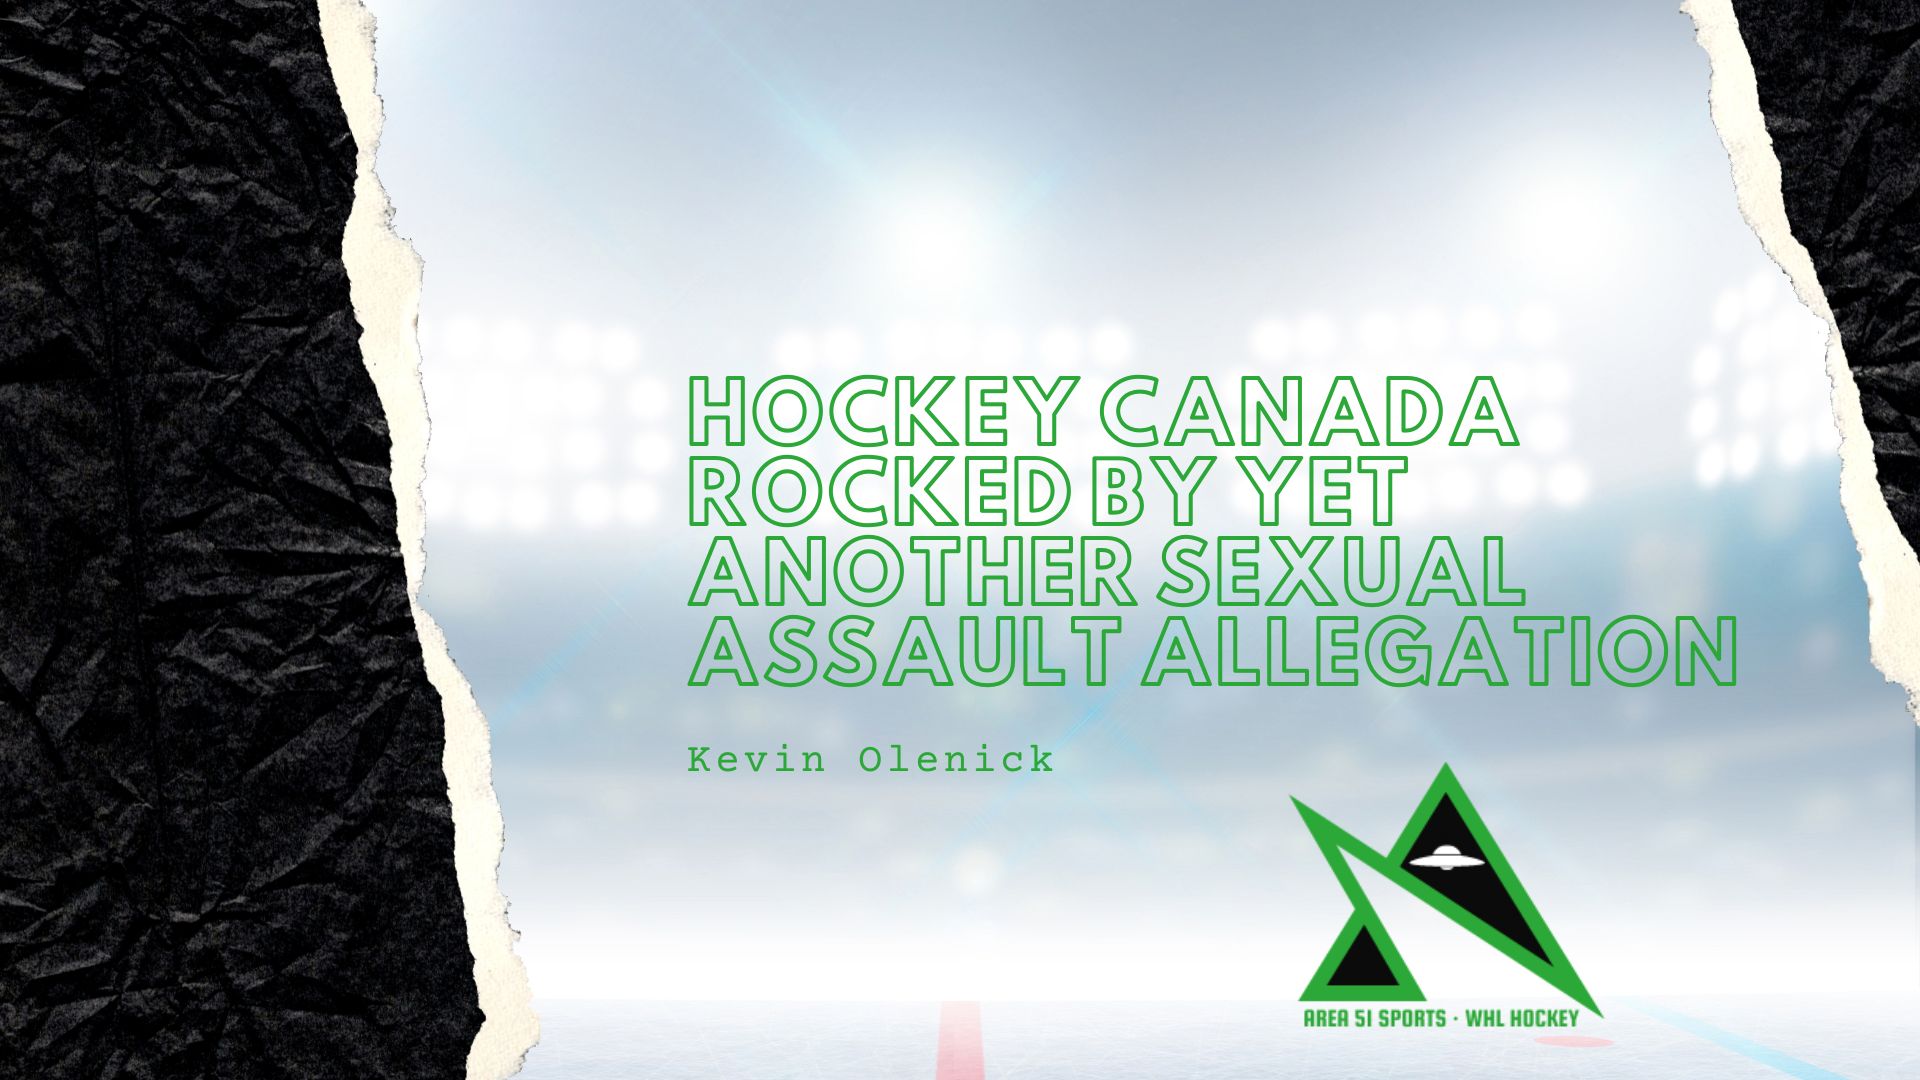 Hockey Canada Rocked by Yet Another Sexual Assault Allegation